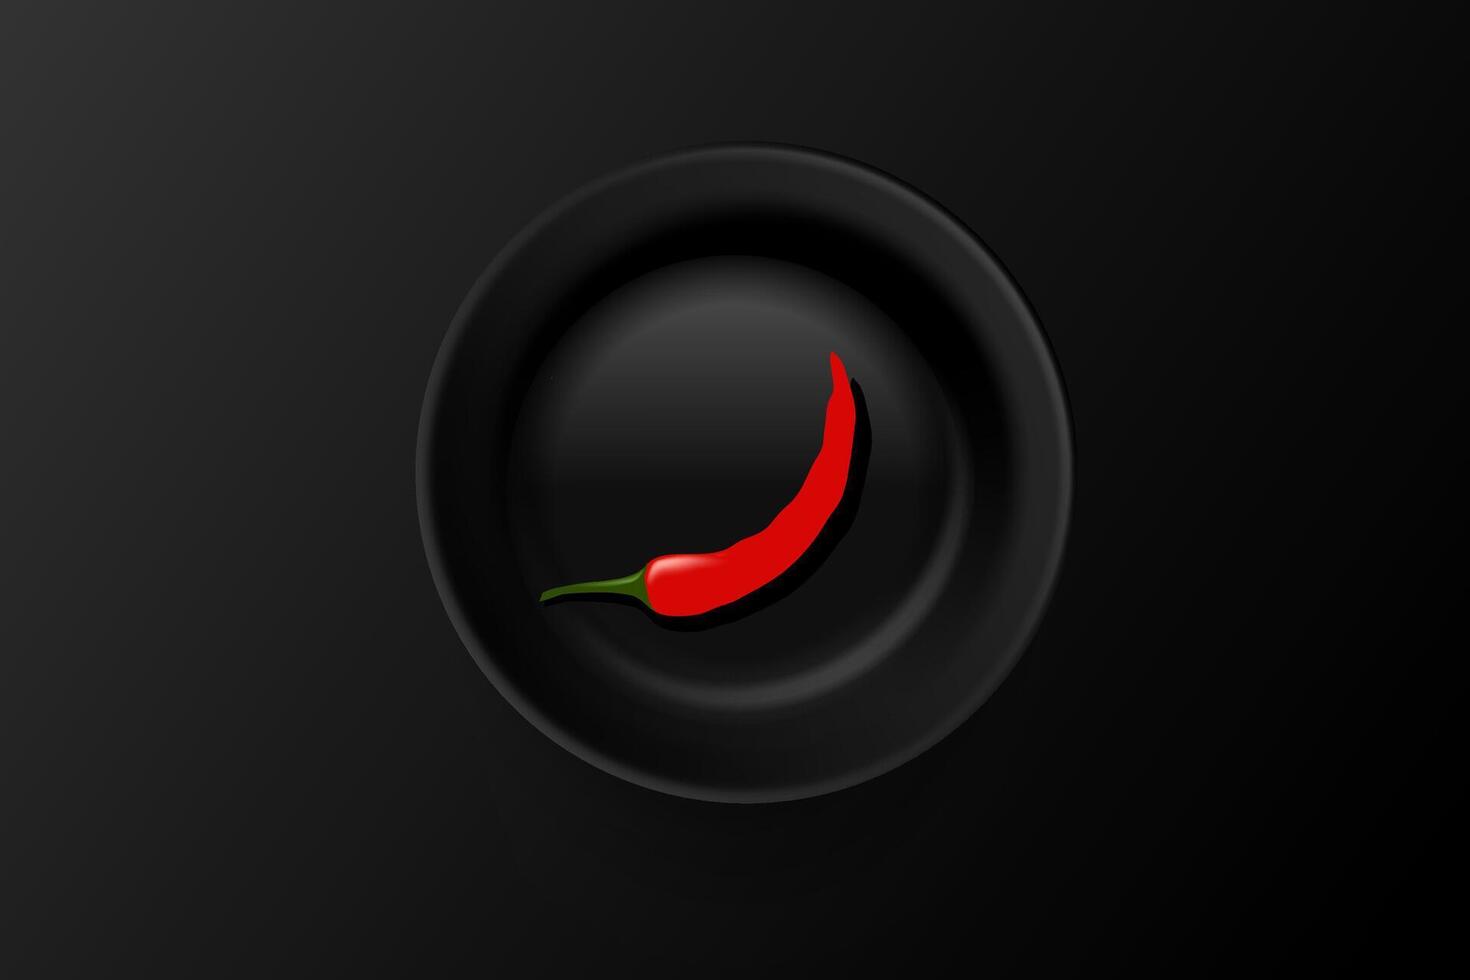 Trendy minimalistic black still life with a chili pepper on a black plate vector